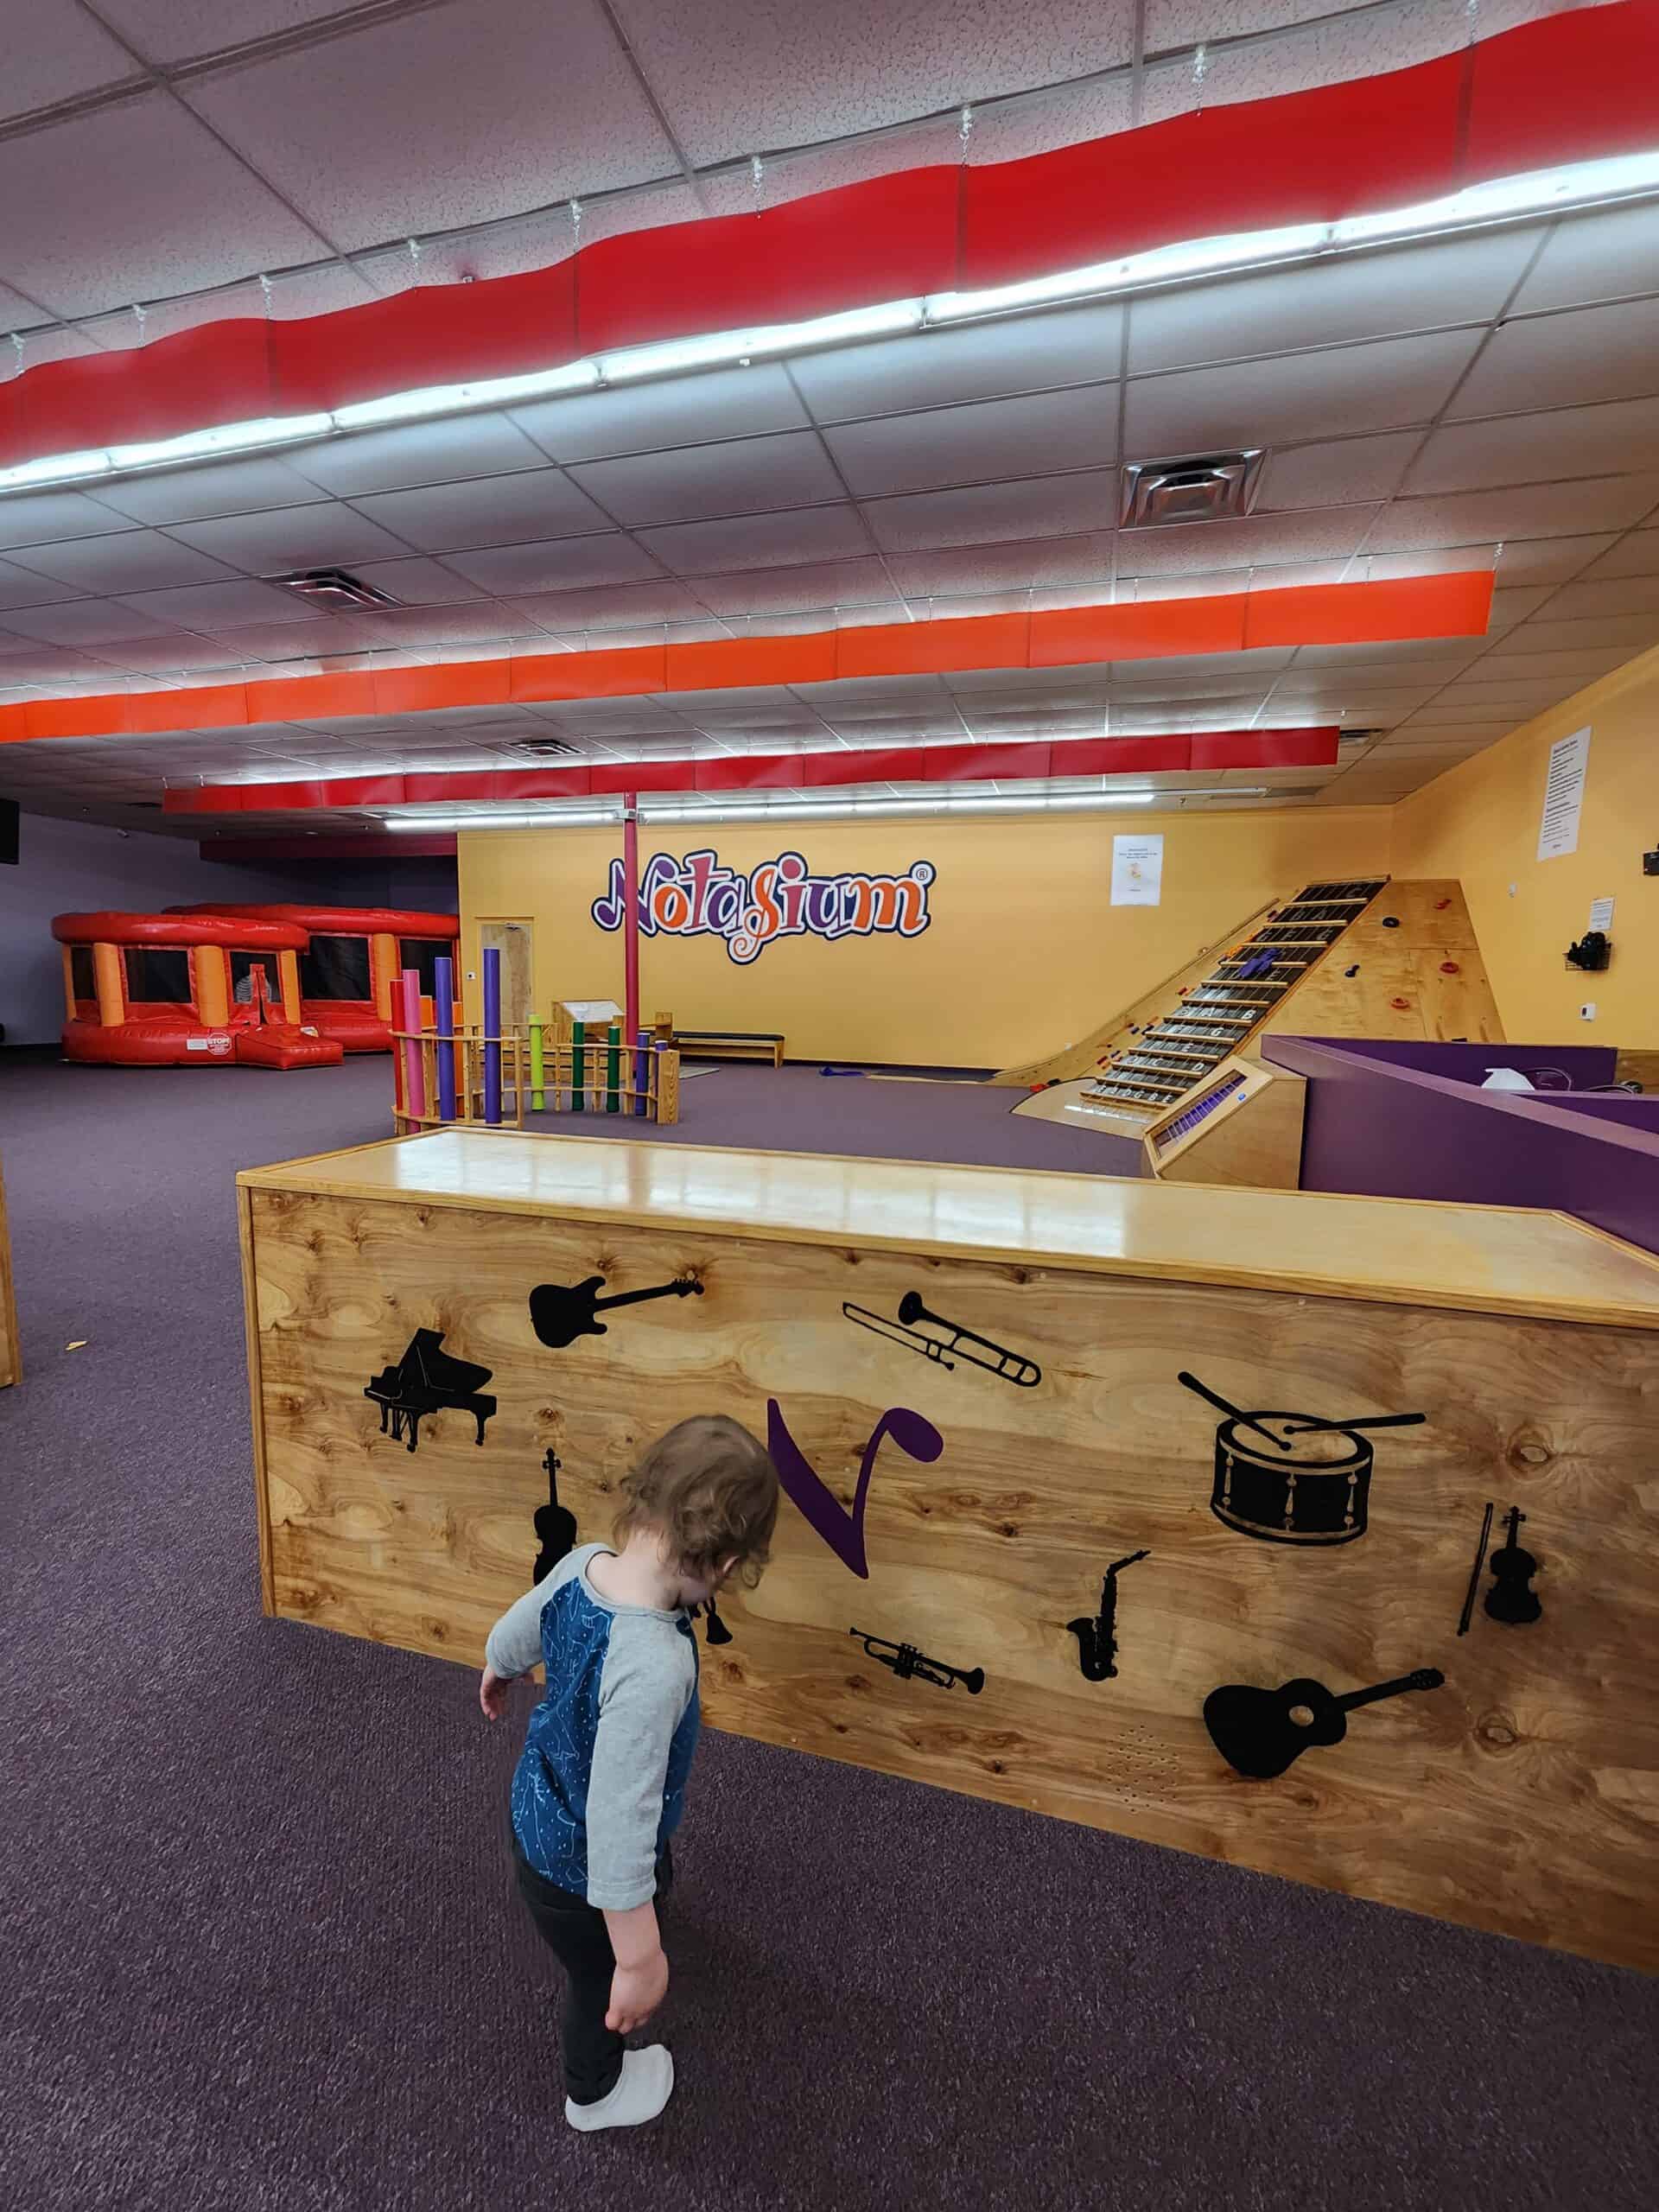 
A small child stands in an indoor play area with the sign "Notasium" in the background. The space features colorful play equipment and a wooden partition decorated with silhouettes of musical instruments.